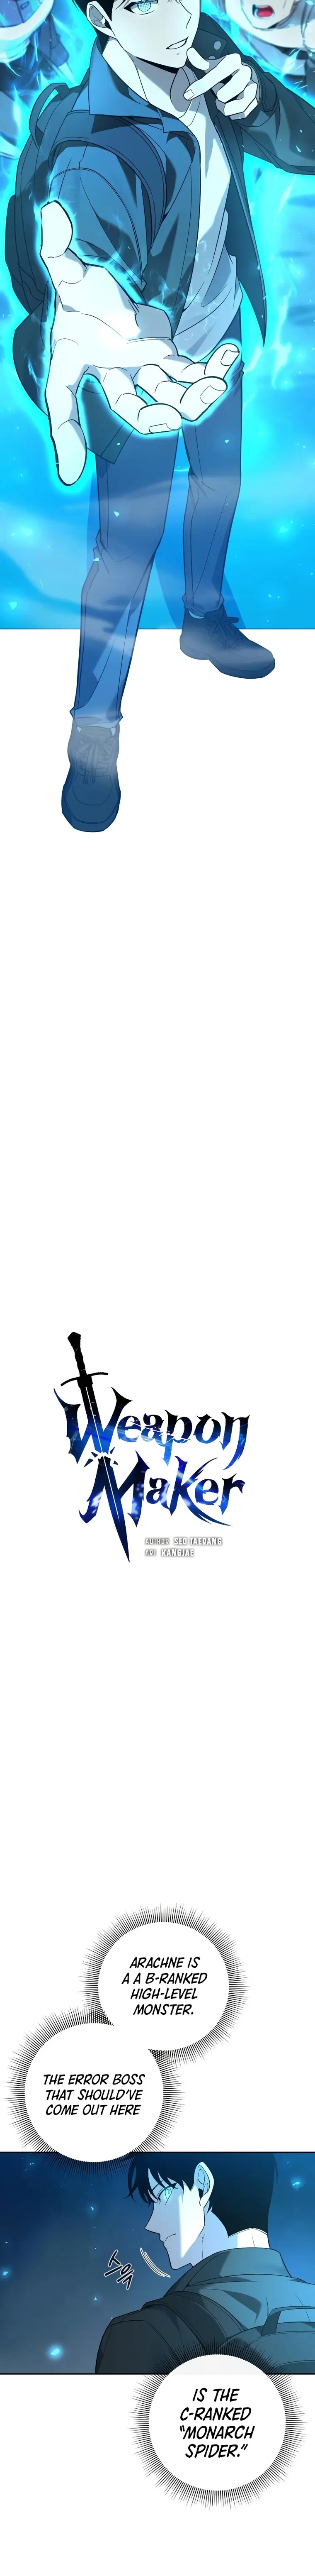 Weapon Maker chapter 10